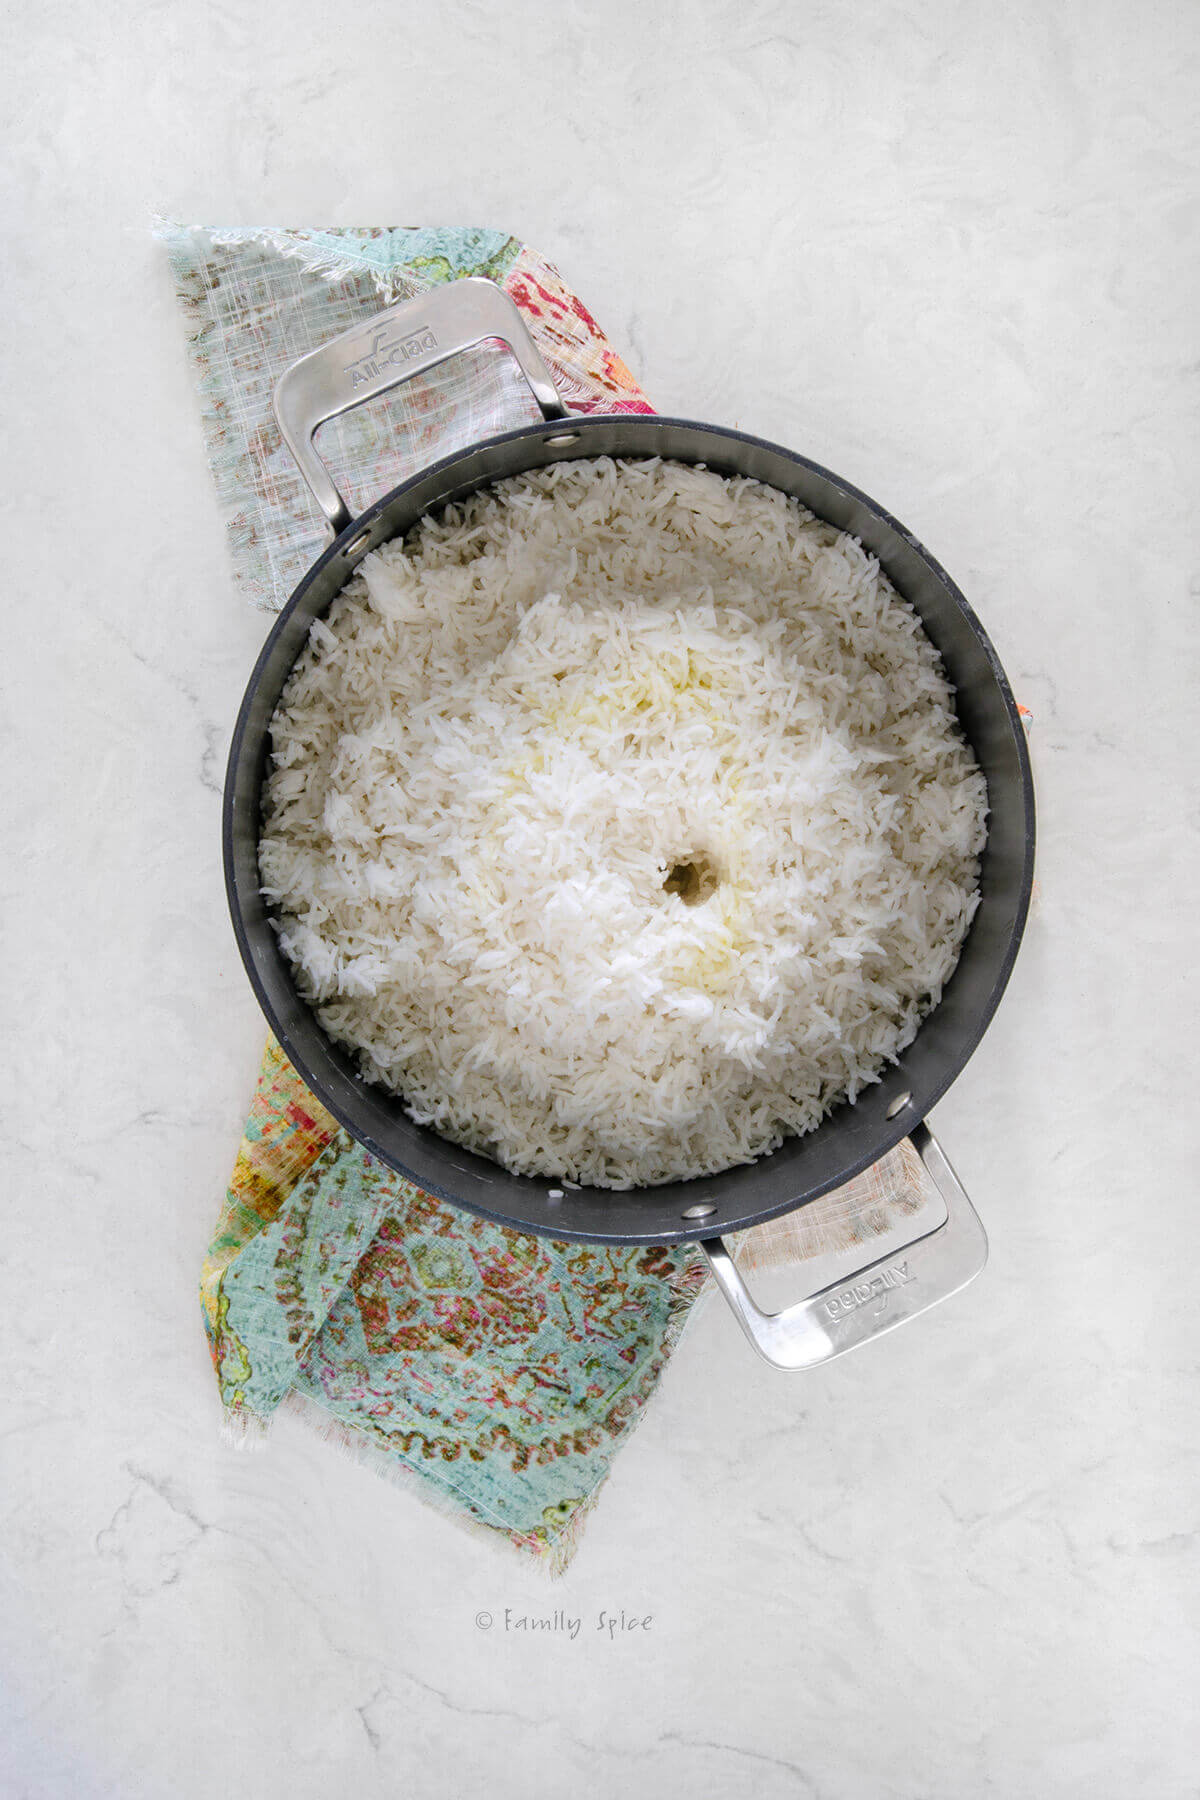 Top view of a non-stick pot with parboiled Persian rice layered in it with the center hollowed out